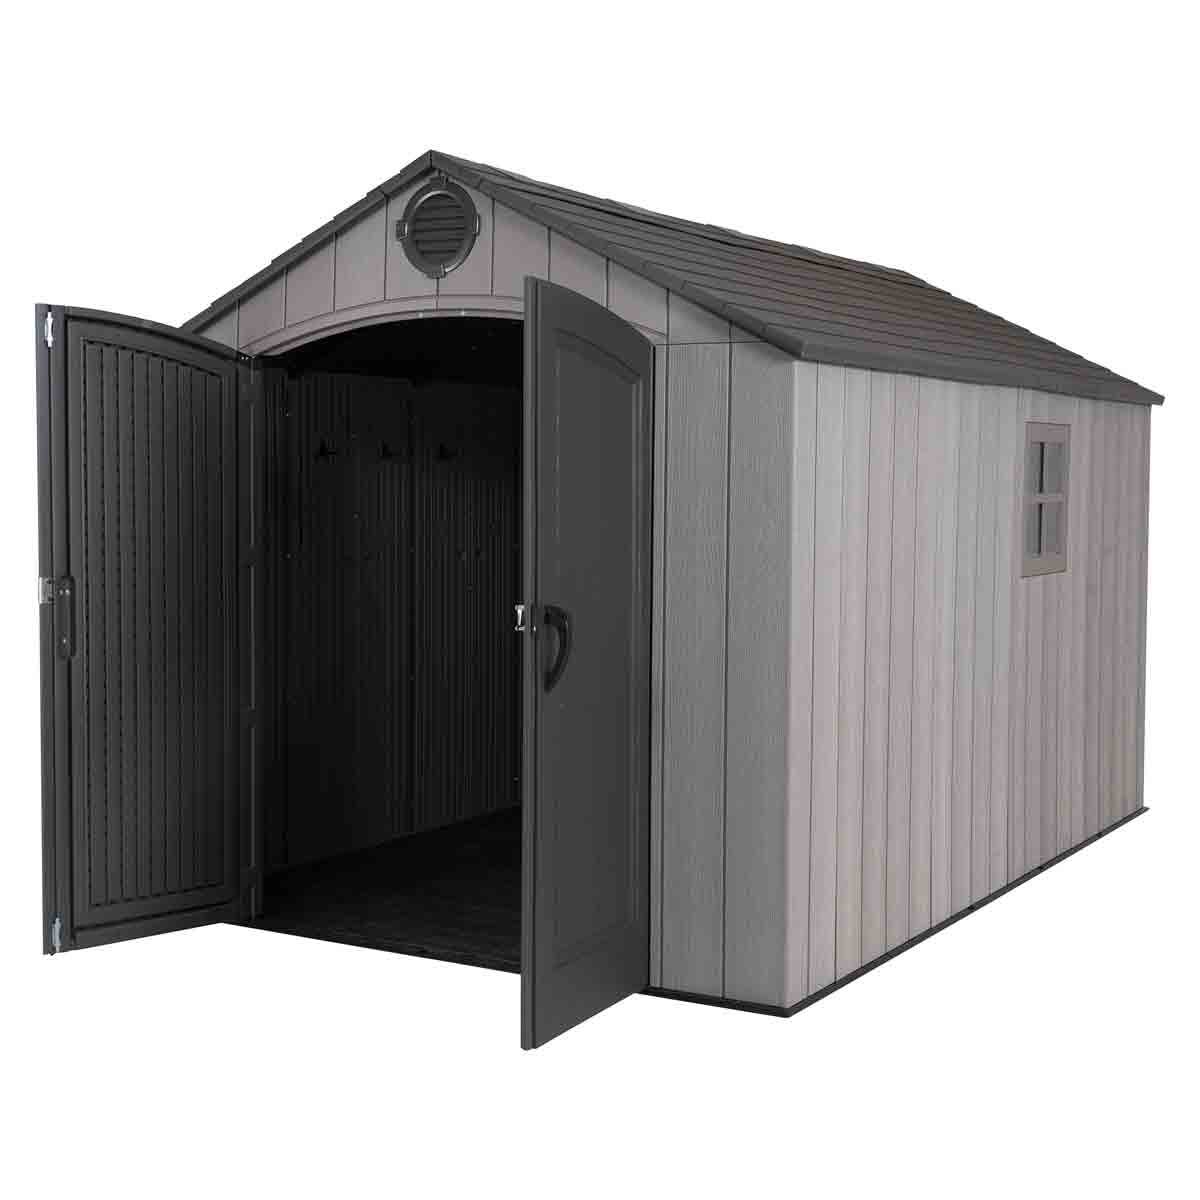 Lifetime 8Ft X 12.5Ft. Outdoor Storage Shed - Brown